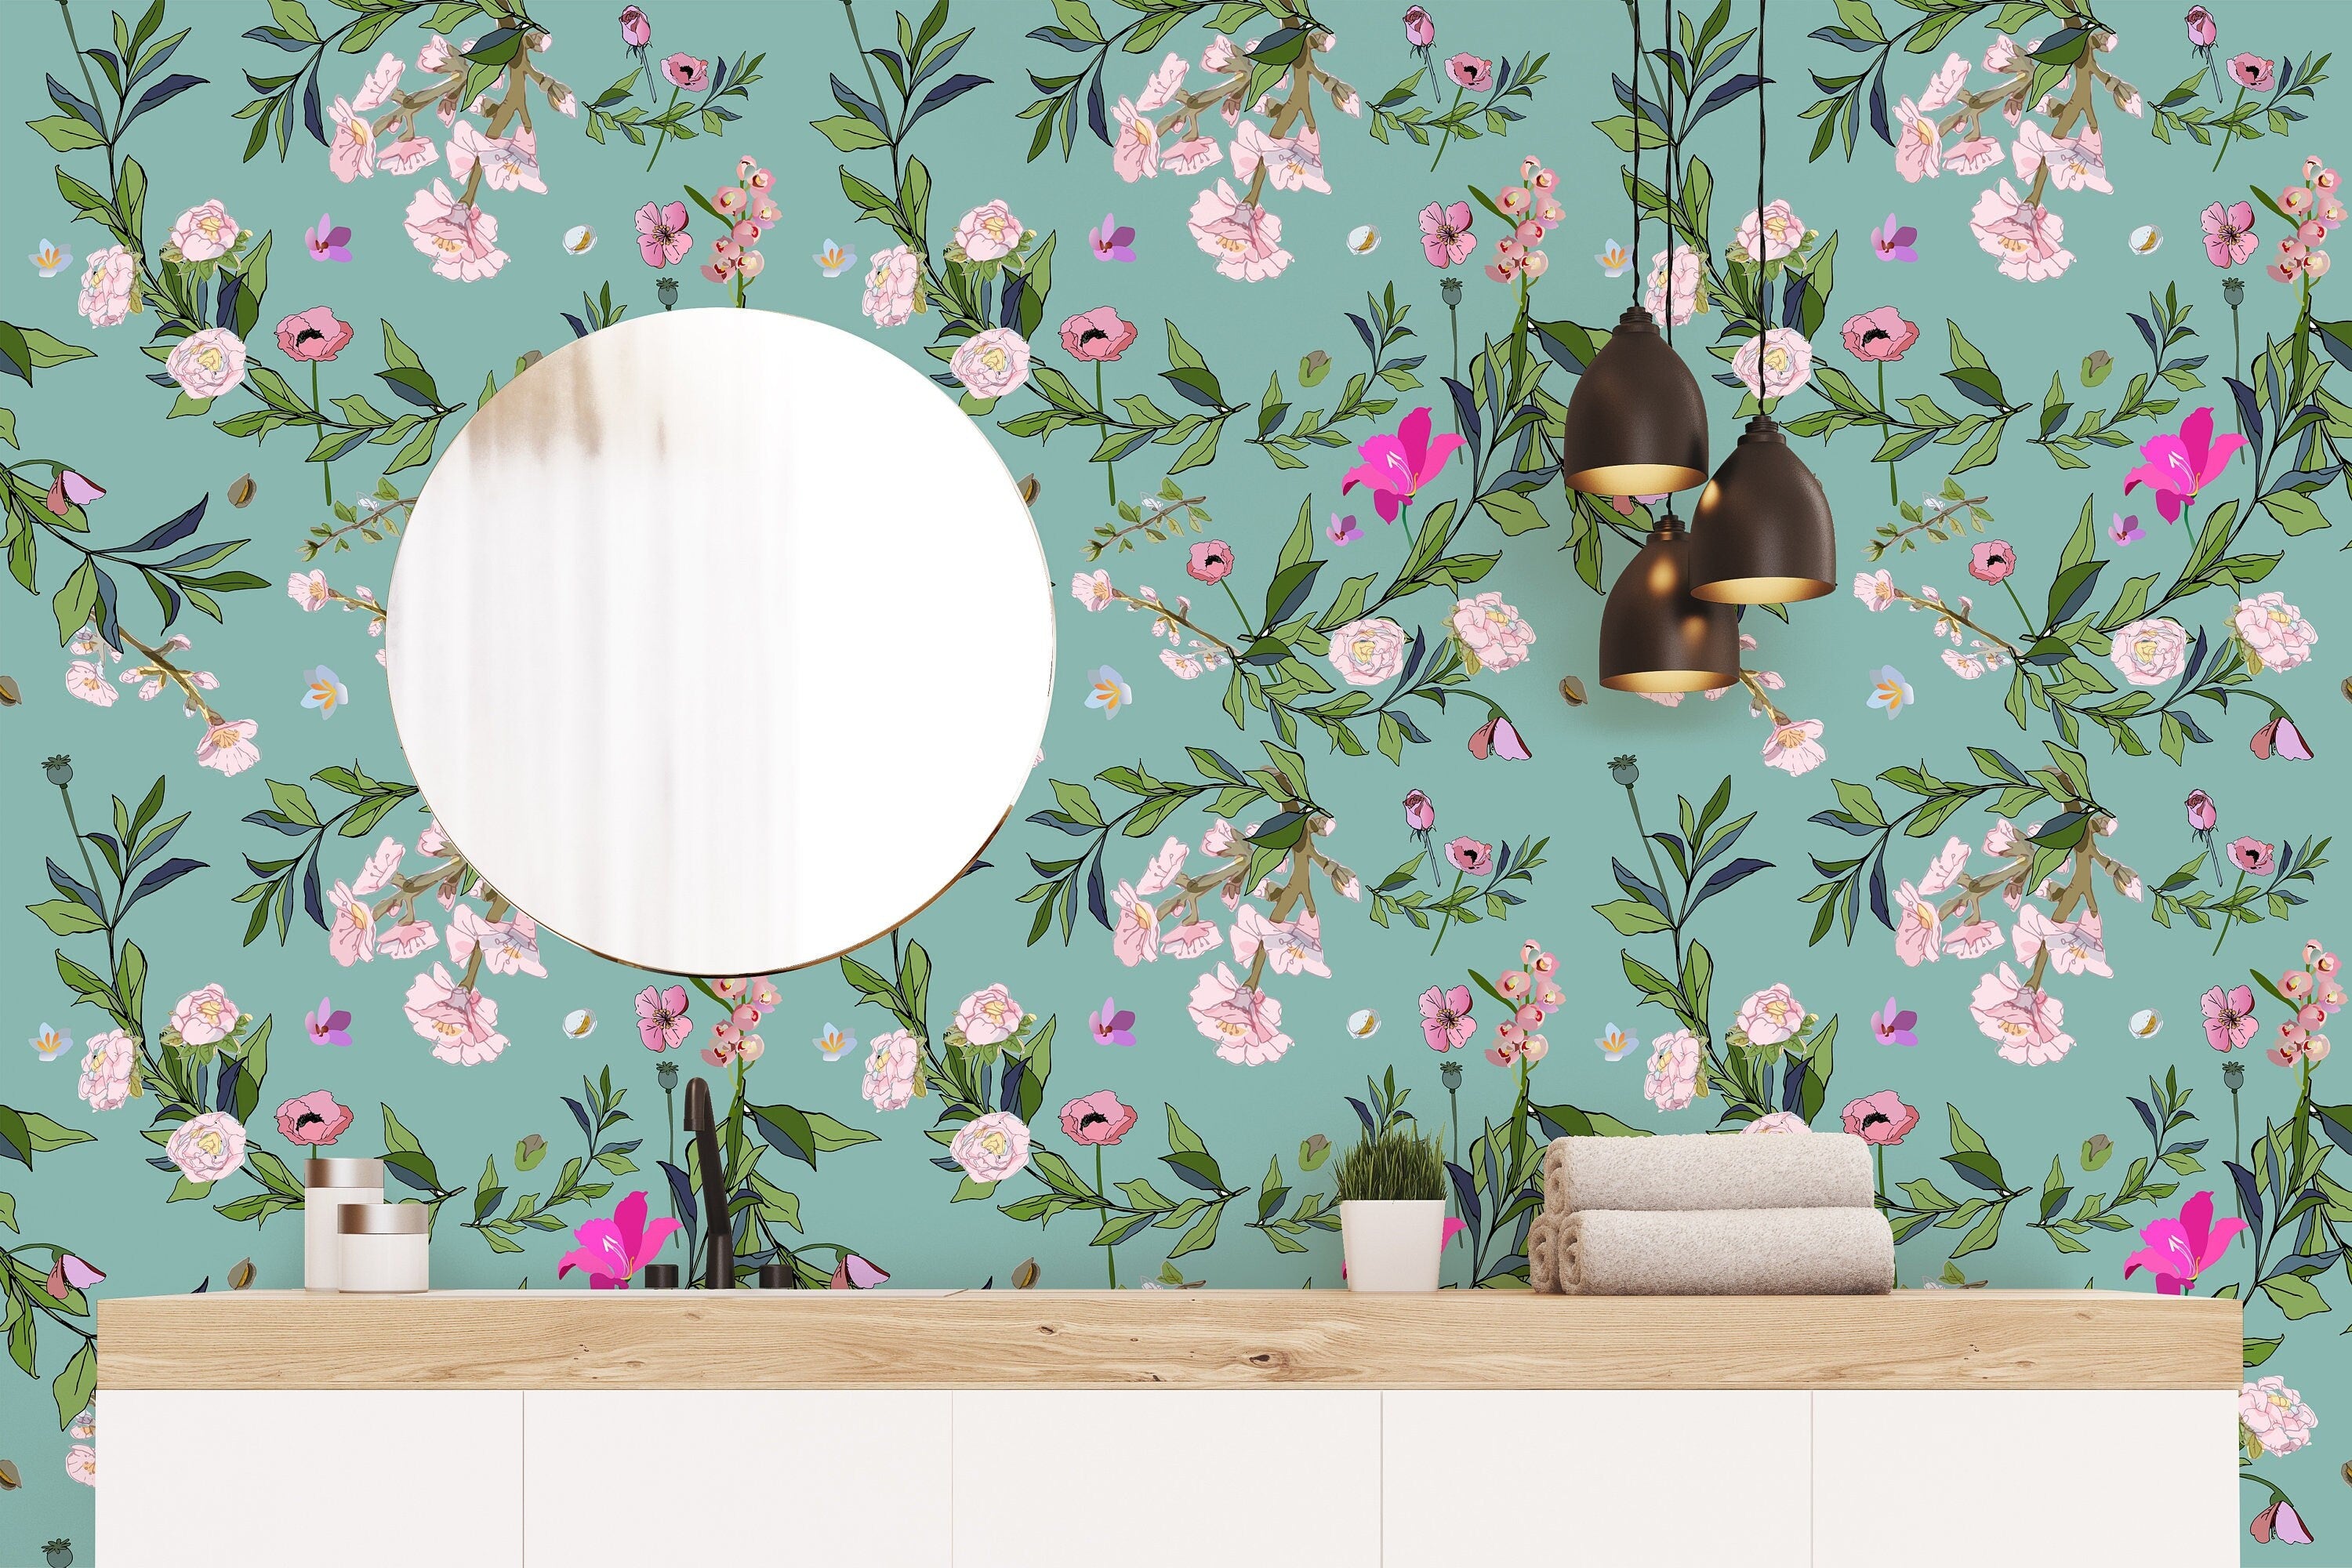 Blue  White Floral Wallpaper | Wallpaper Peel and Stick | Removable Wallpaper | Peel and Stick Wallpaper | Wall Paper Peel And Stick | 2178 - JamesAndColors